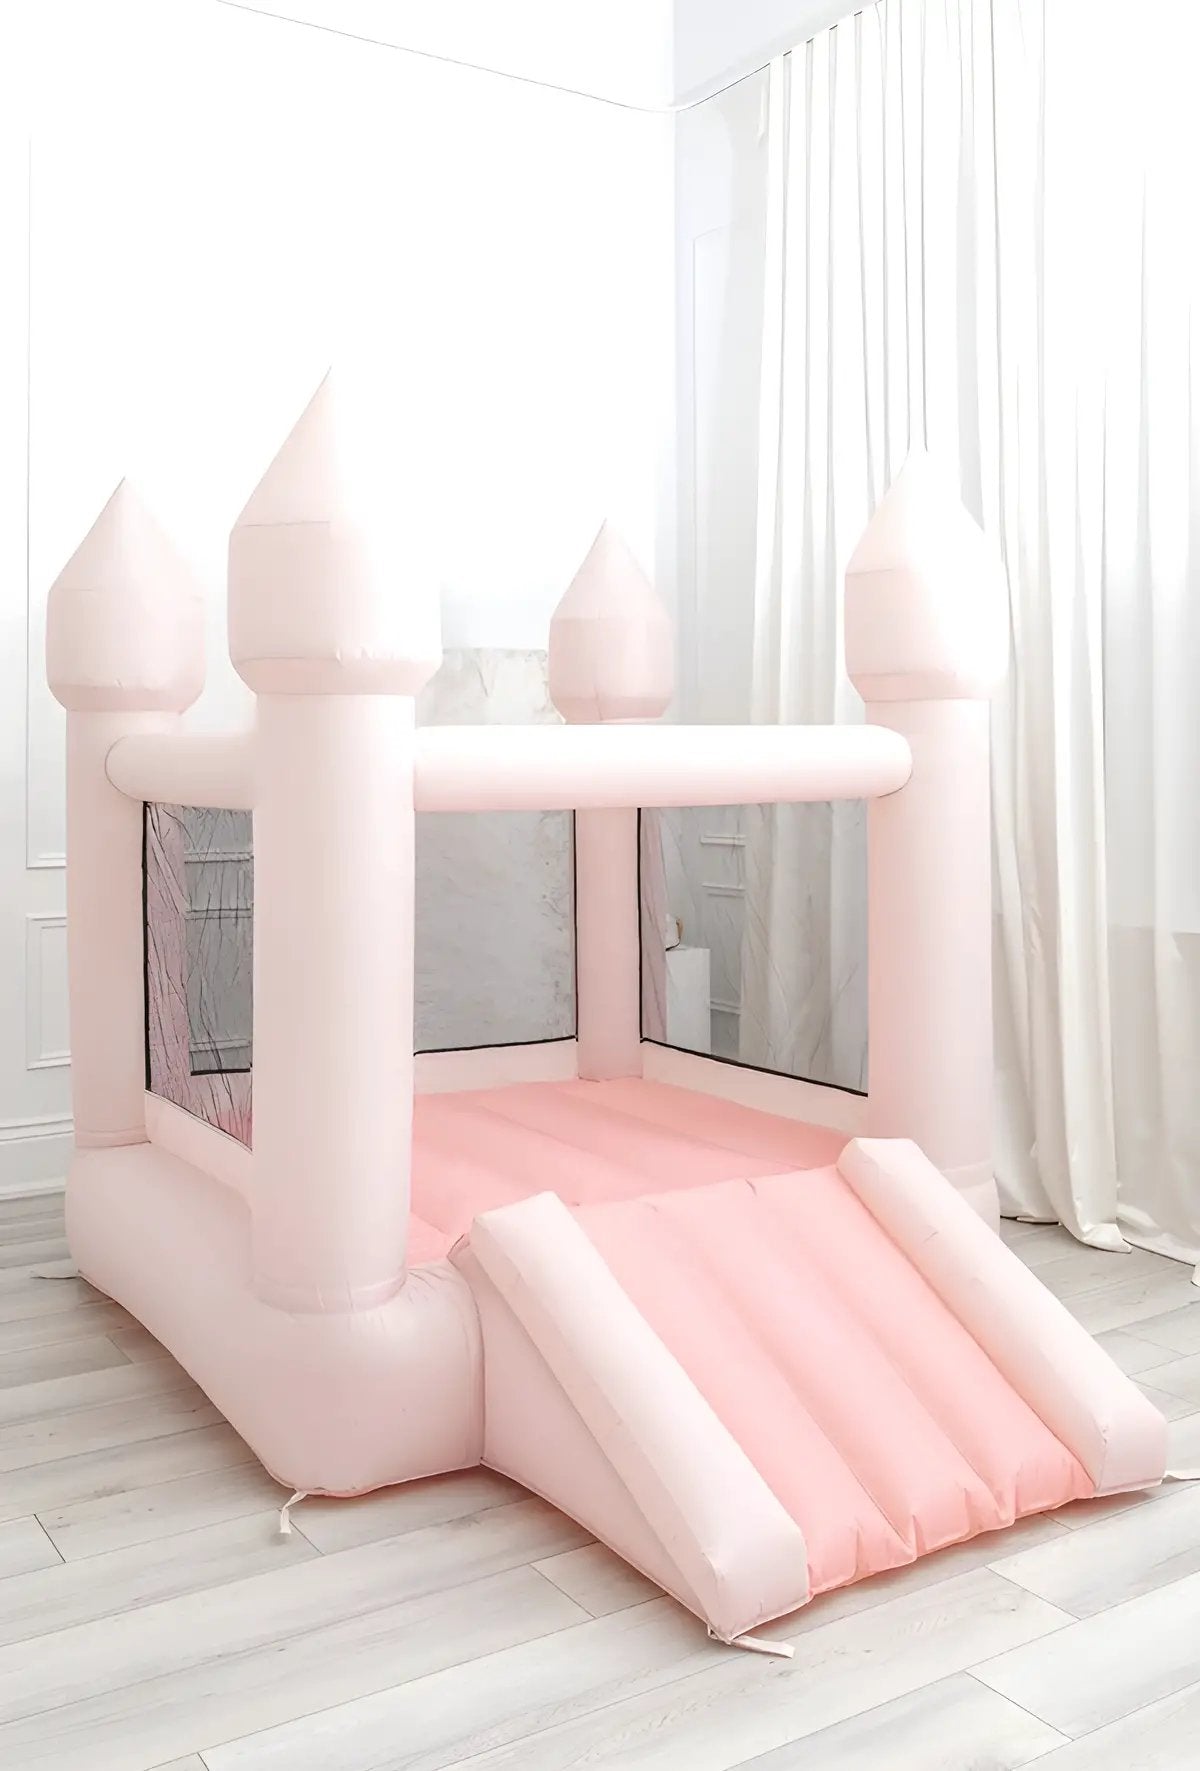 Pastel Little Bounce, pink bounce house, placed in the living room